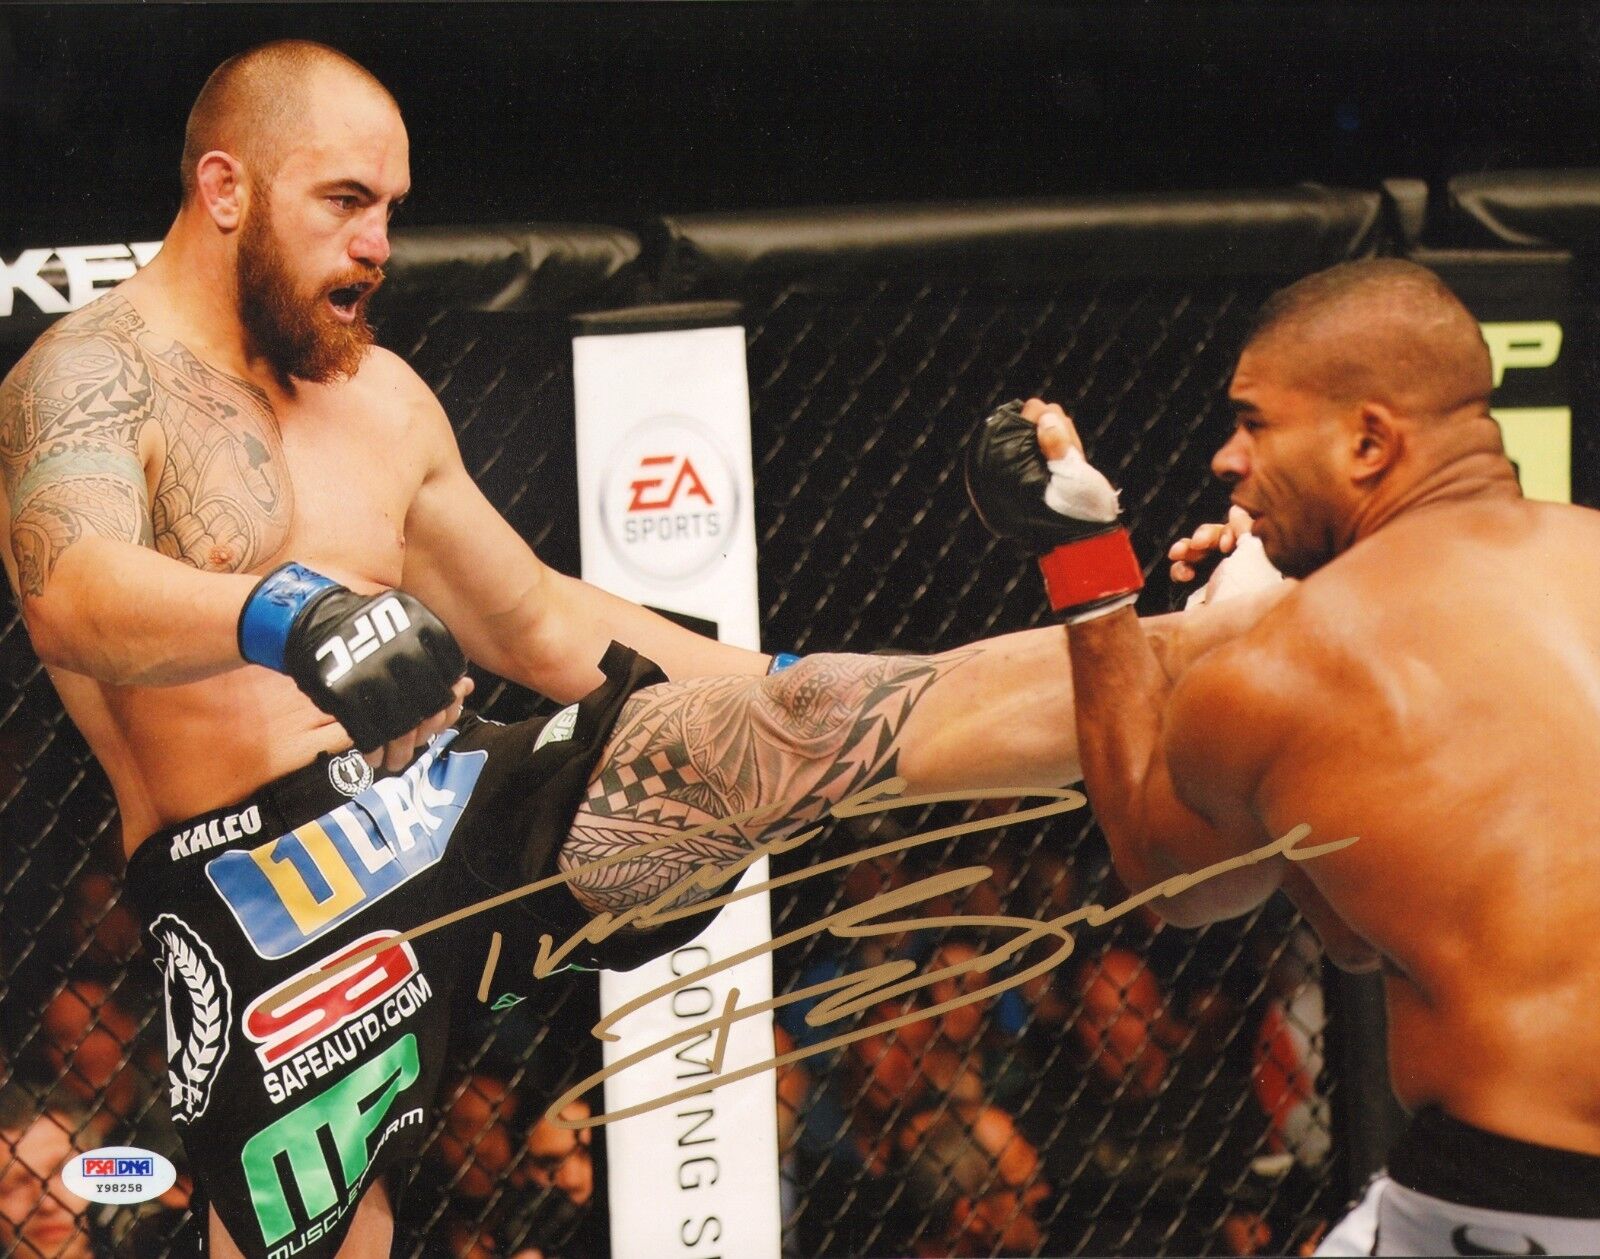 Travis Browne Signed UFC 11x14 Photo Poster painting PSA/DNA COA Auto'd Picture Fight Night 26